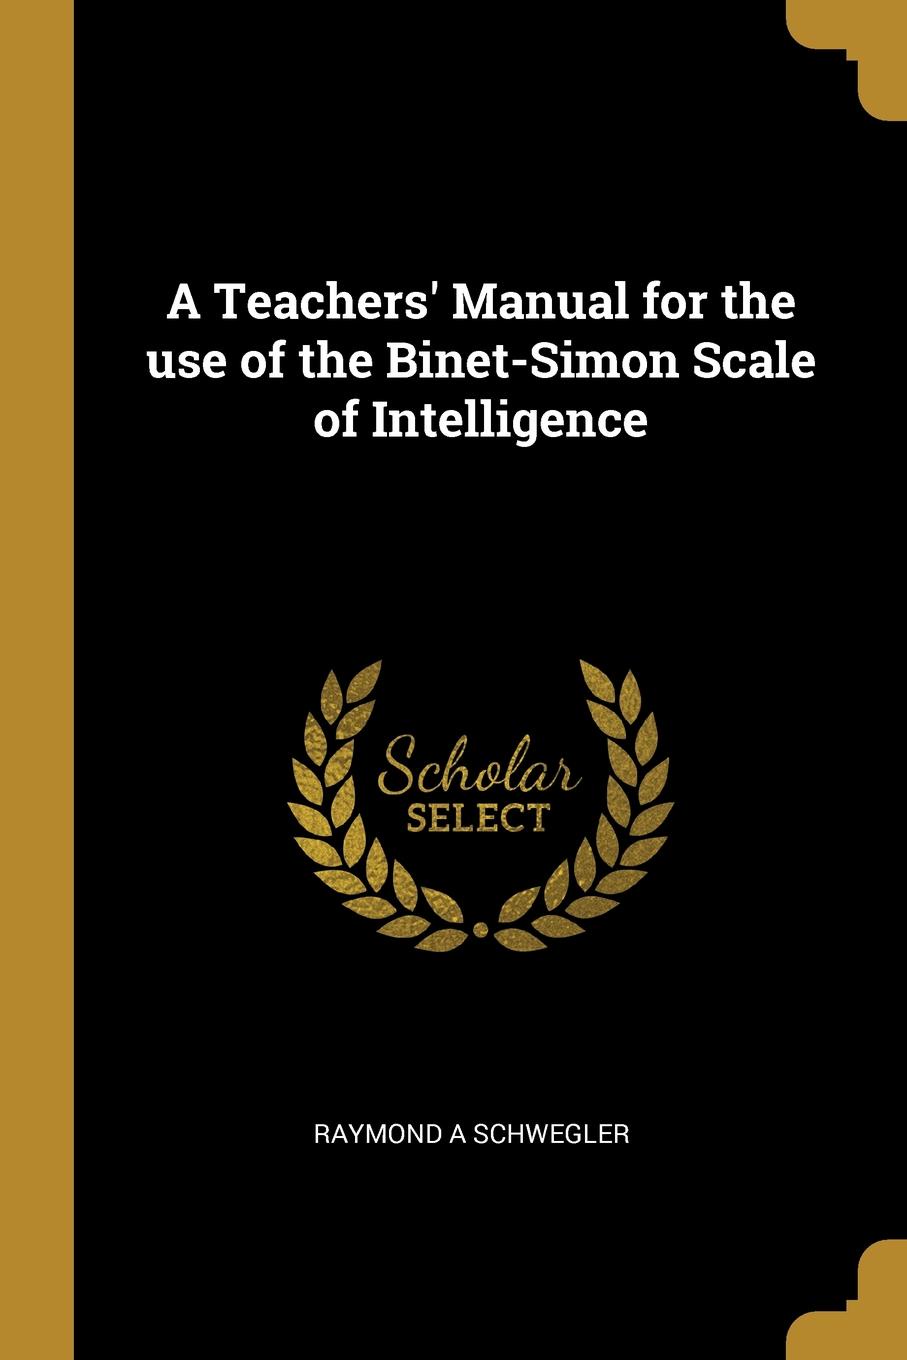 A Teachers. Manual for the use of the Binet-Simon Scale of Intelligence